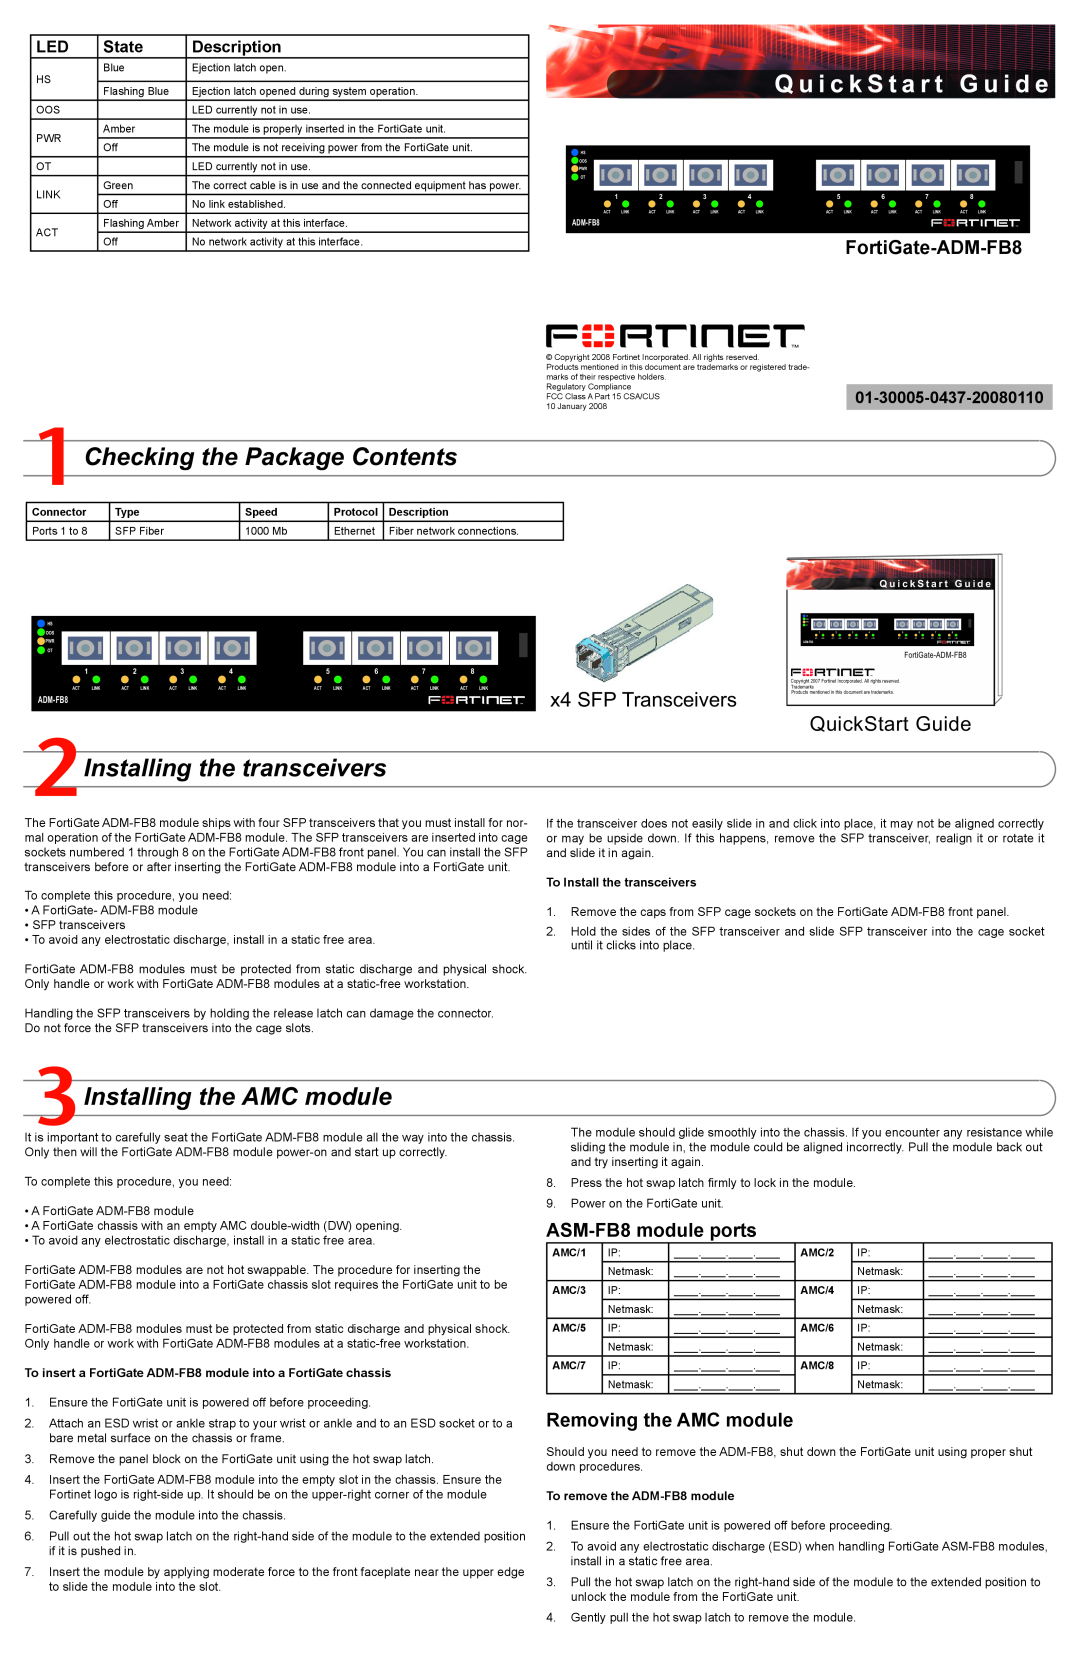 Fortinet ADM-FB8 quick start Checking the Package Contents, Installing the transceivers, Installing the AMC module, State 